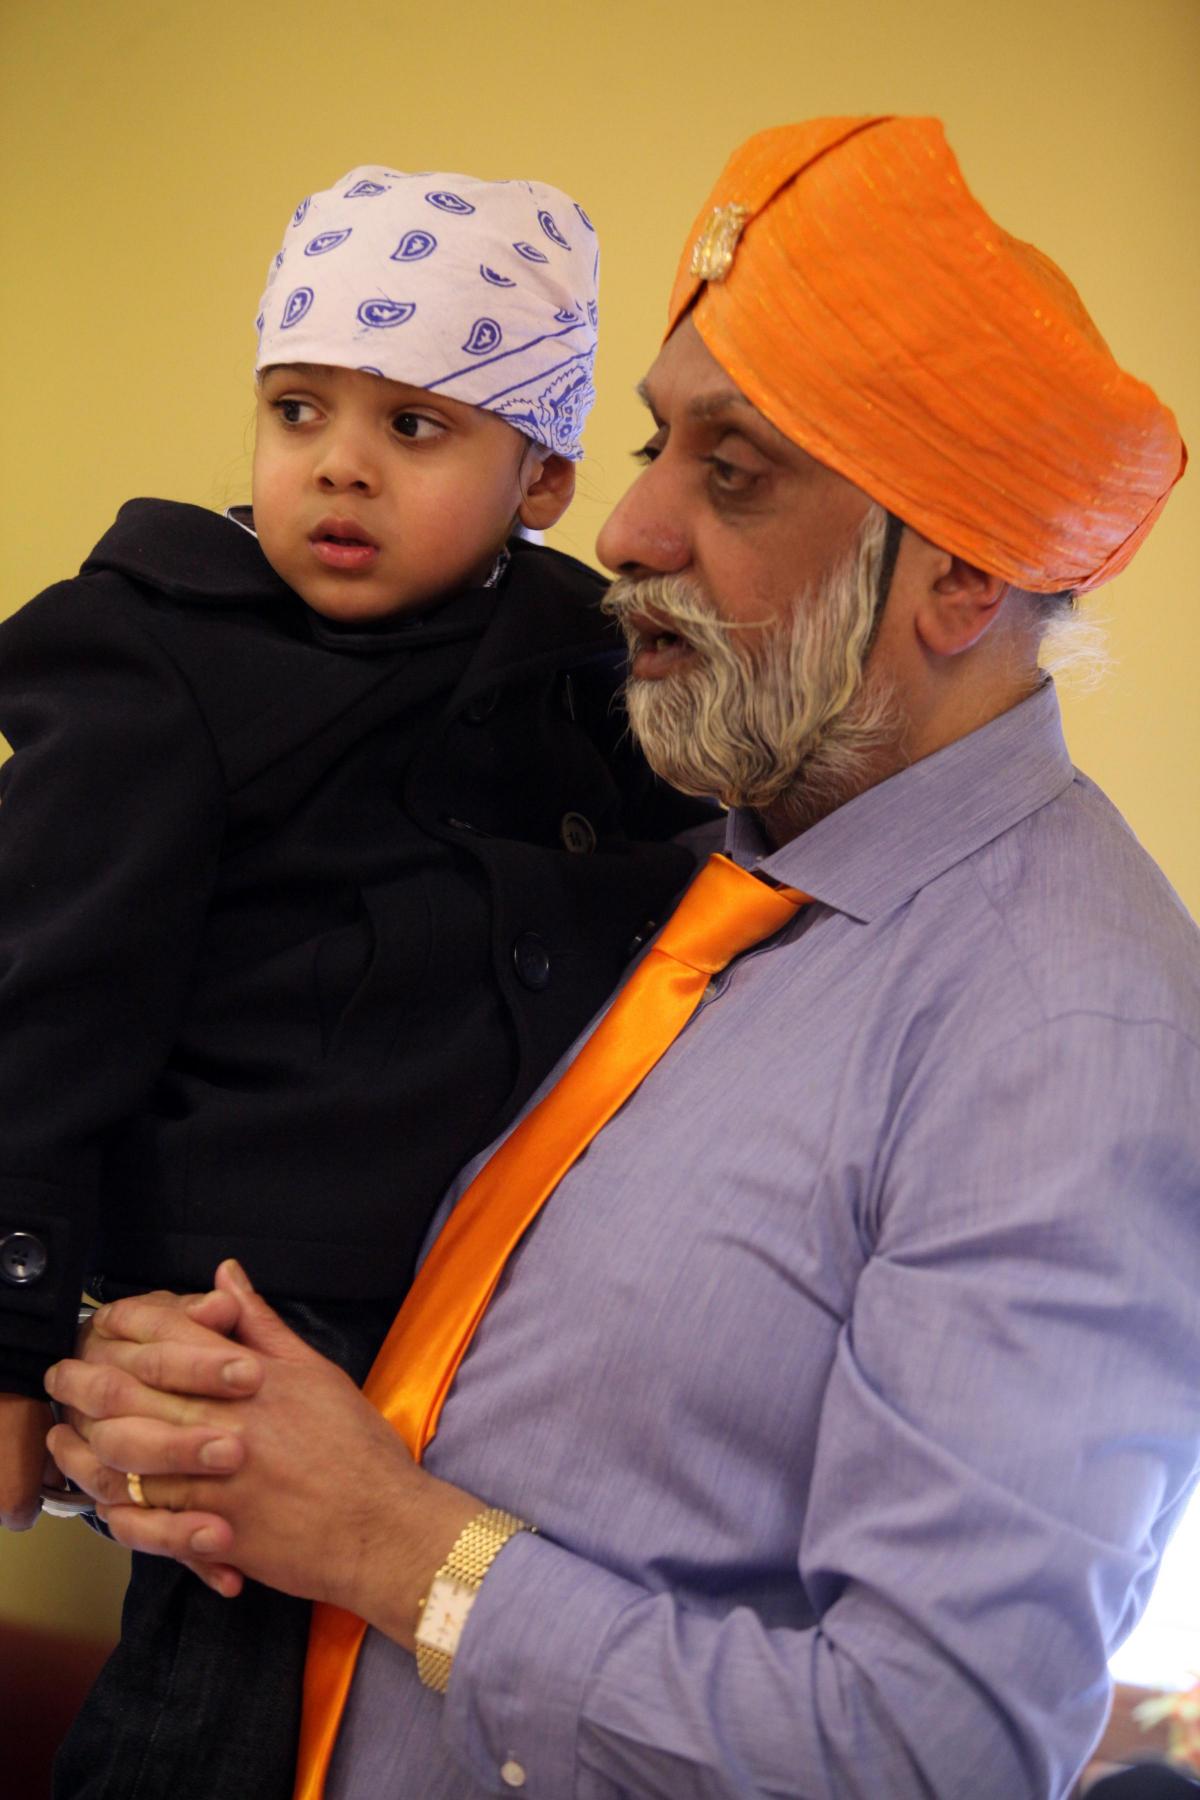 Picture of the Sikh community in Southampton honouring community stars as part of the celebration of the tenth Sikh guru Gobind Singh Ji.